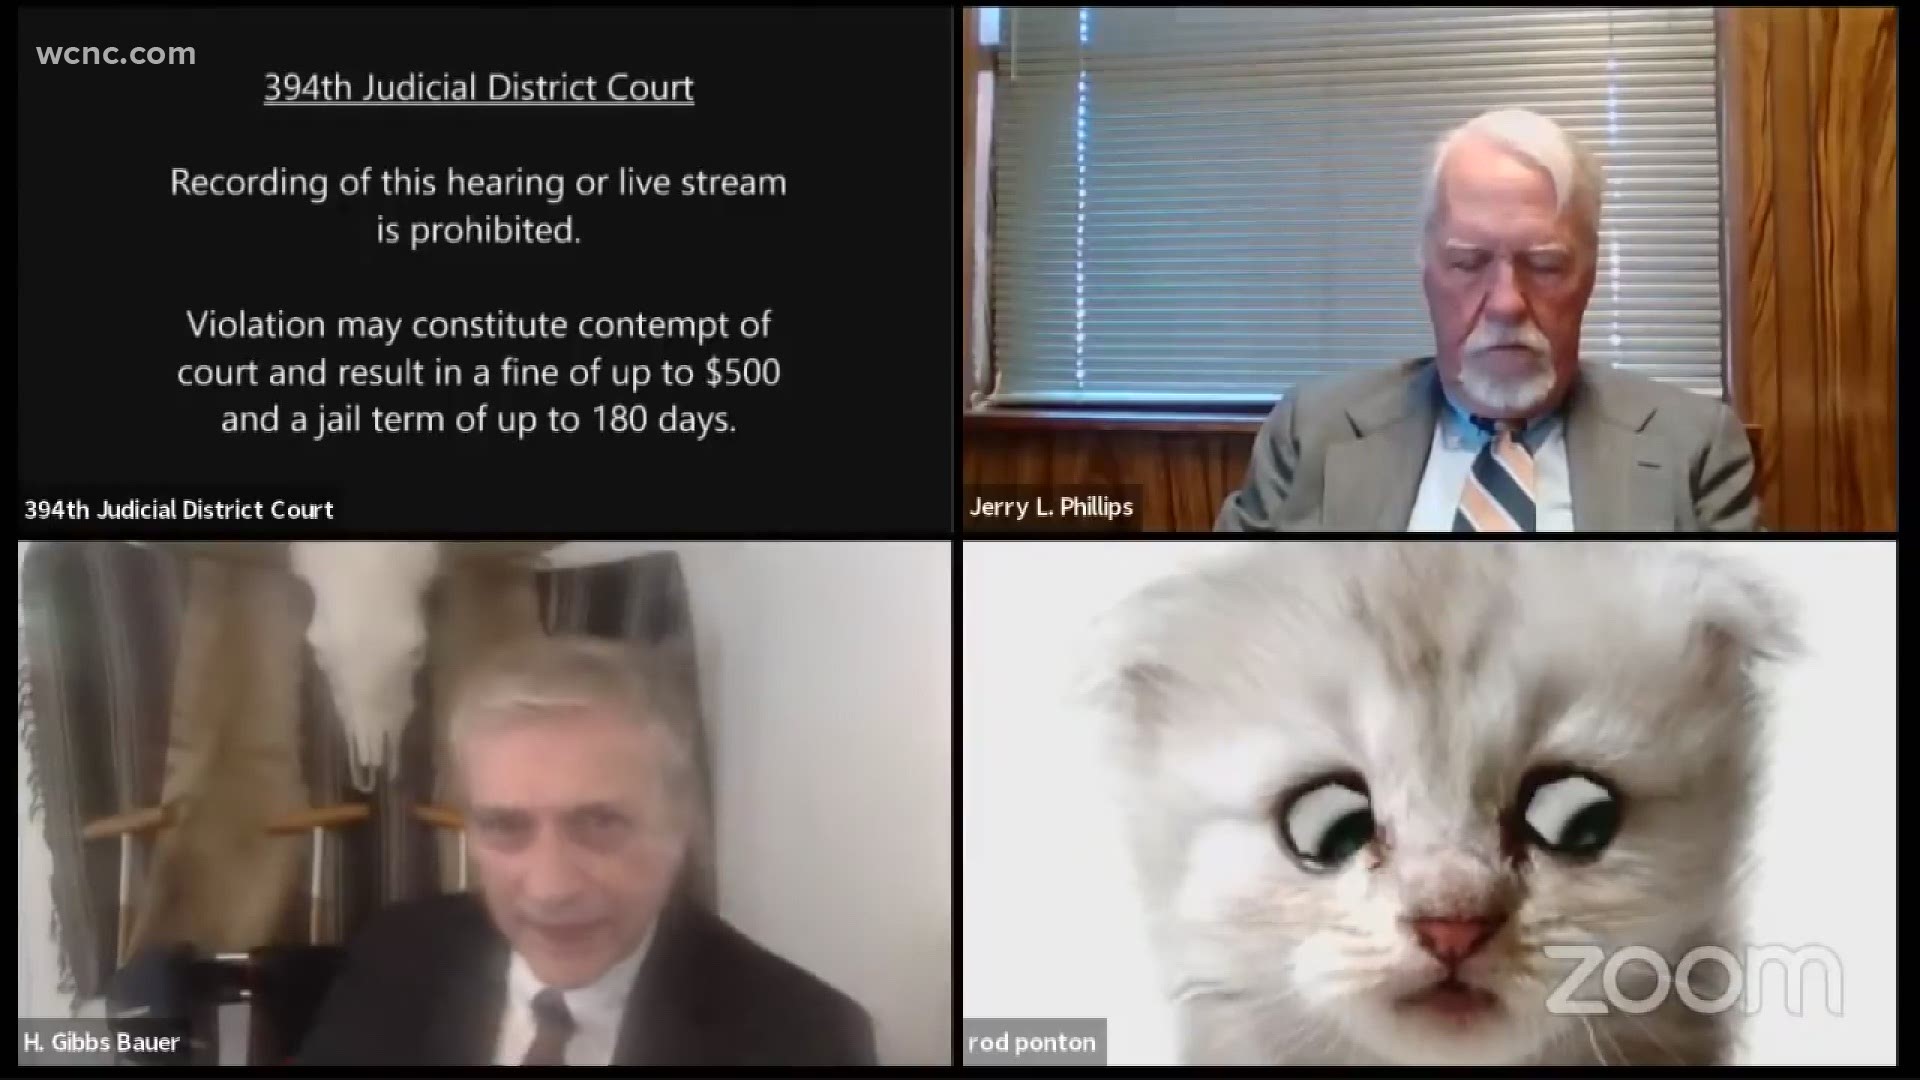 A Texas attorney's Zoom snafu went viral Tuesday after he accidentally used a cat filter during a hearing and had to explain he wasn't actually a cat.